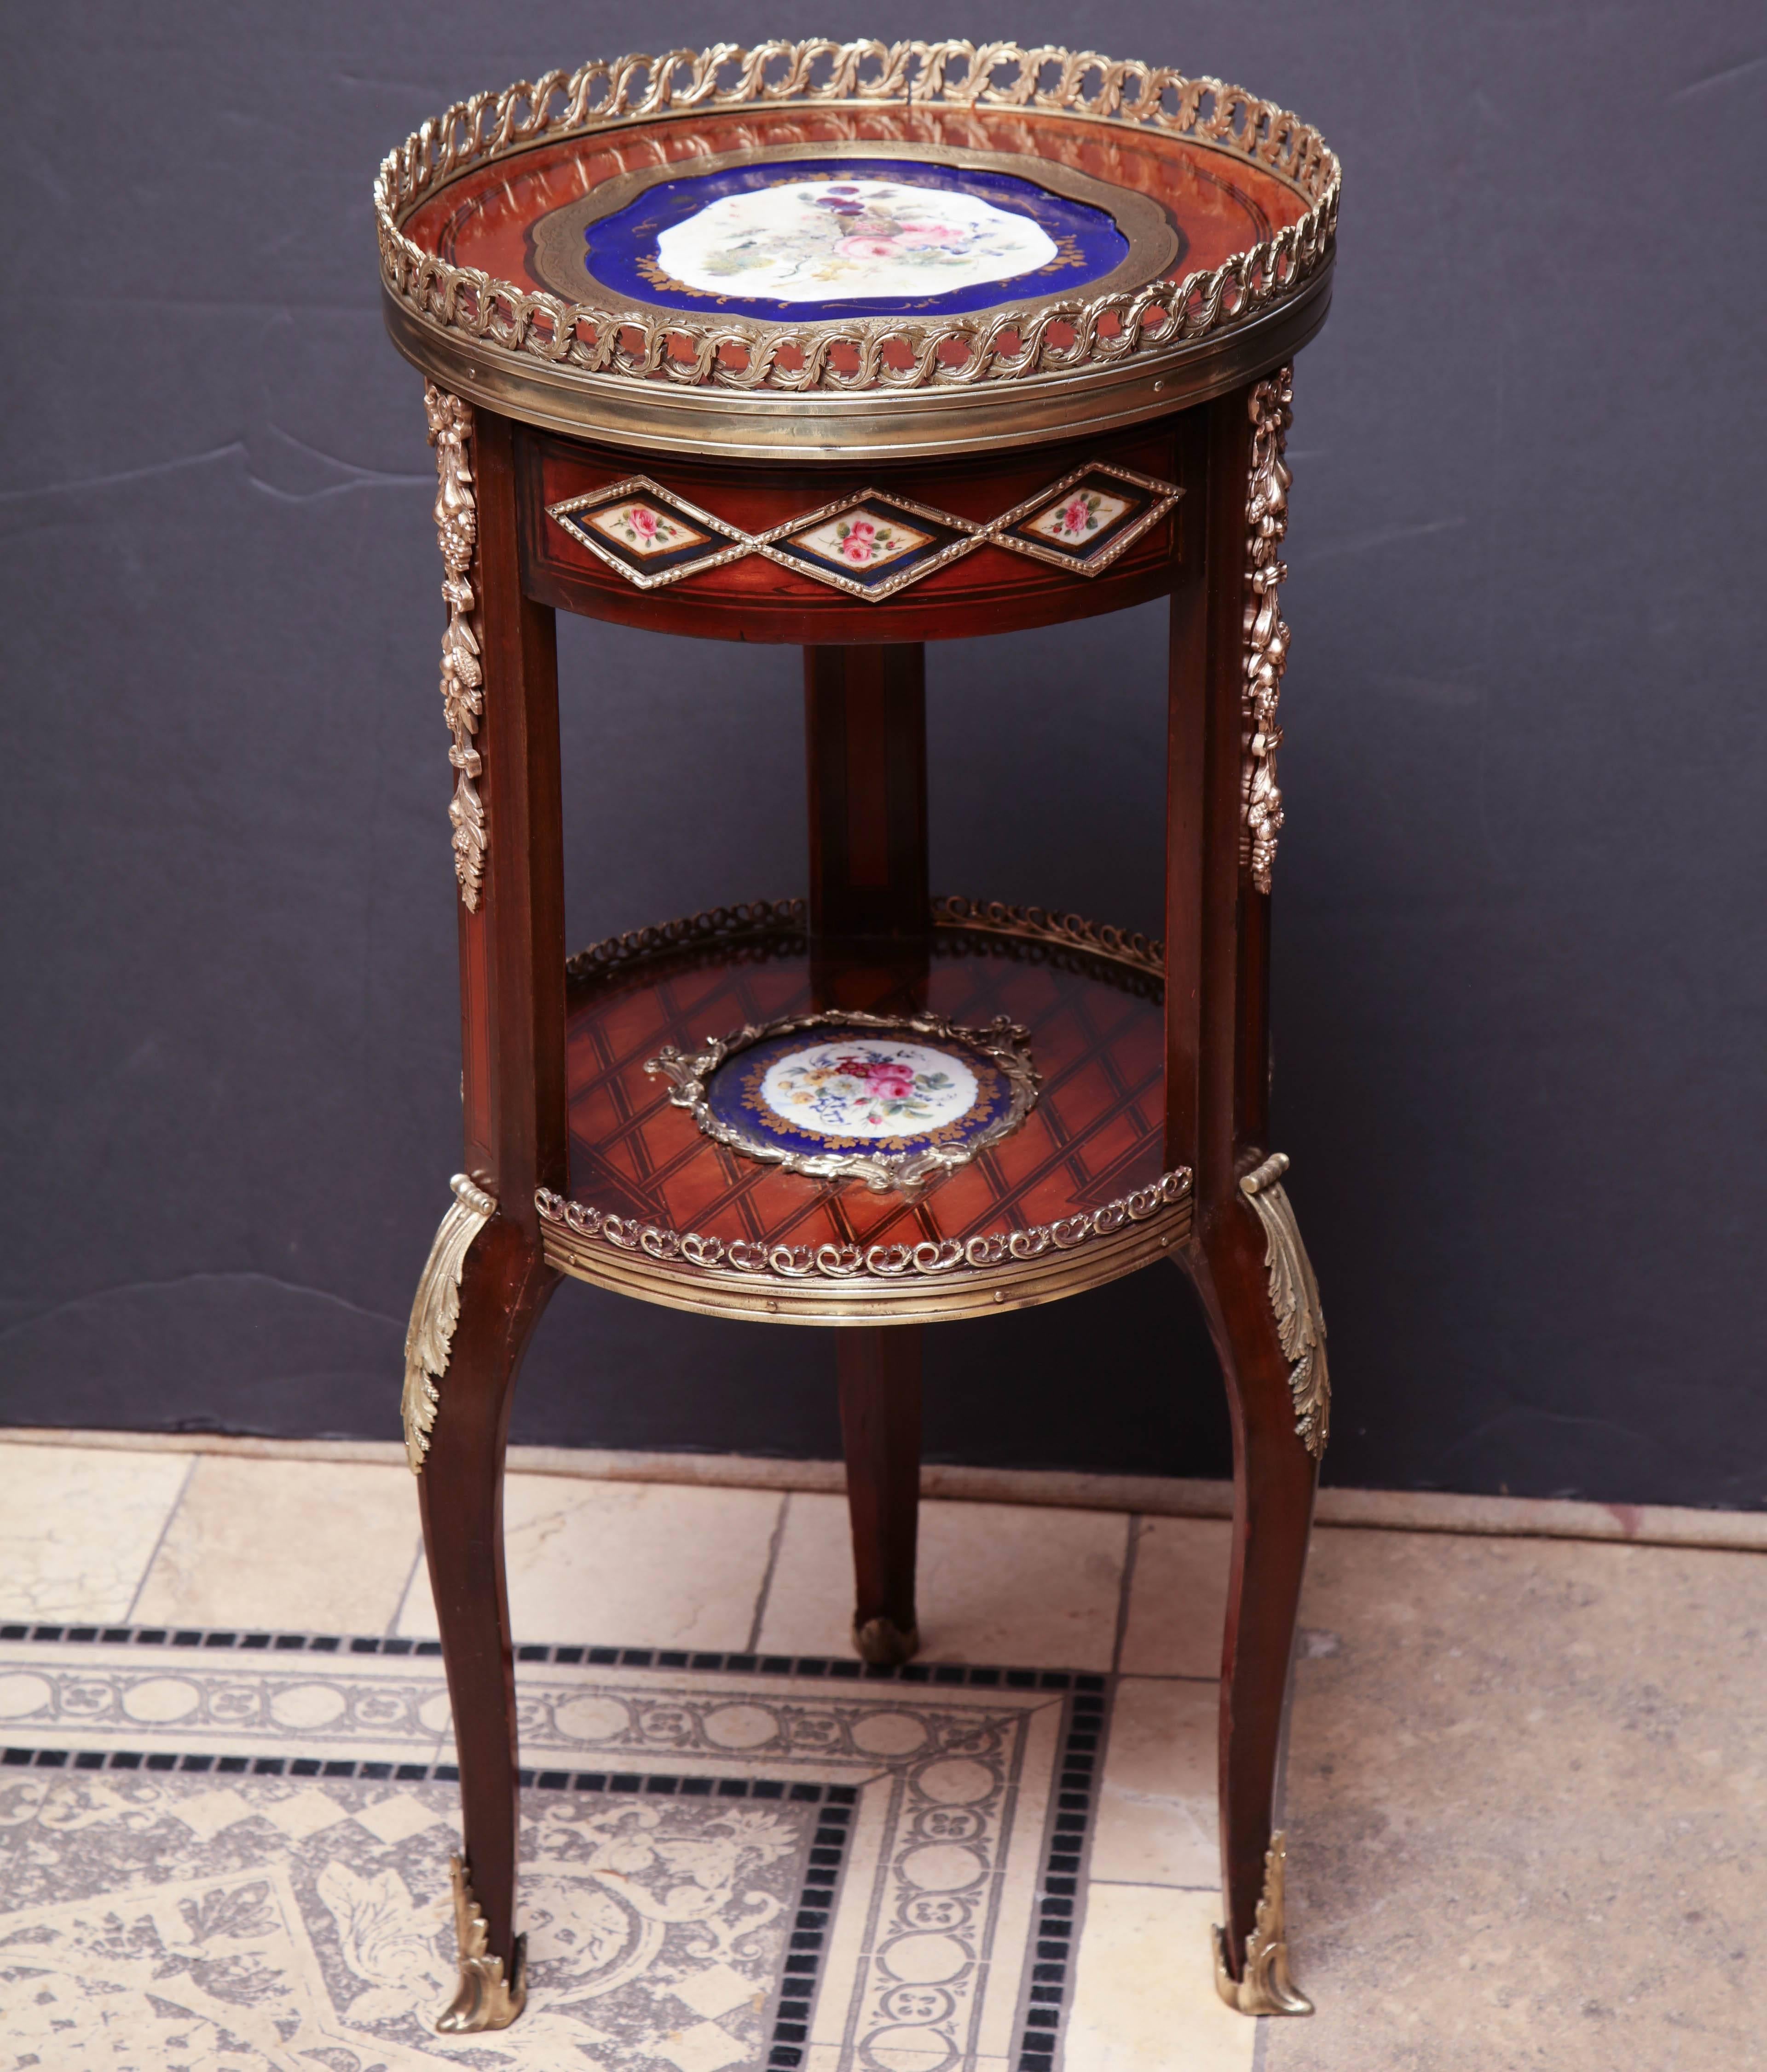 A fine French Louis XVI round side table with porcelain mounts, pierced bronze gallery and mounts, marquetry inlaid lower shelf with bronze ormolu sabots.